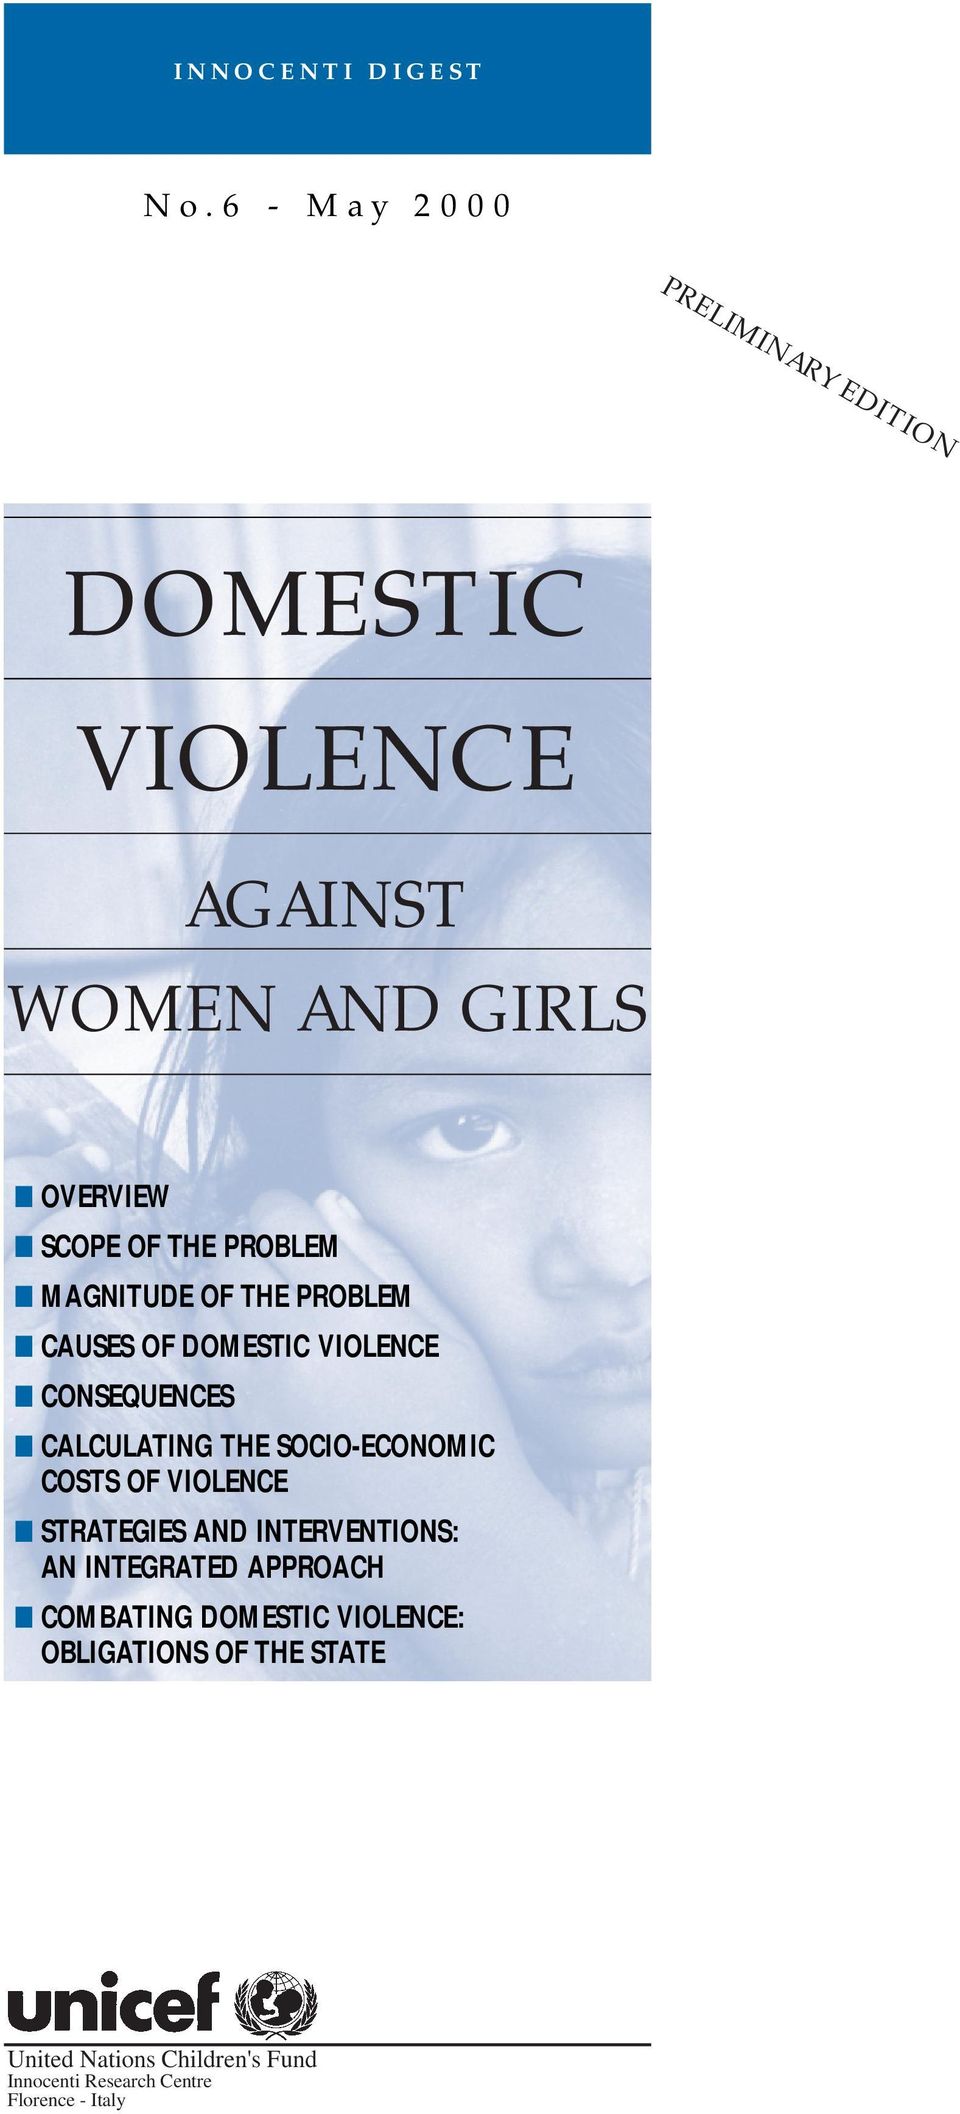 MAGNITUDE OF THE PROBLEM CAUSES OF DOMESTIC VIOLENCE CONSEQUENCES CALCULATING THE SOCIO-ECONOMIC COSTS